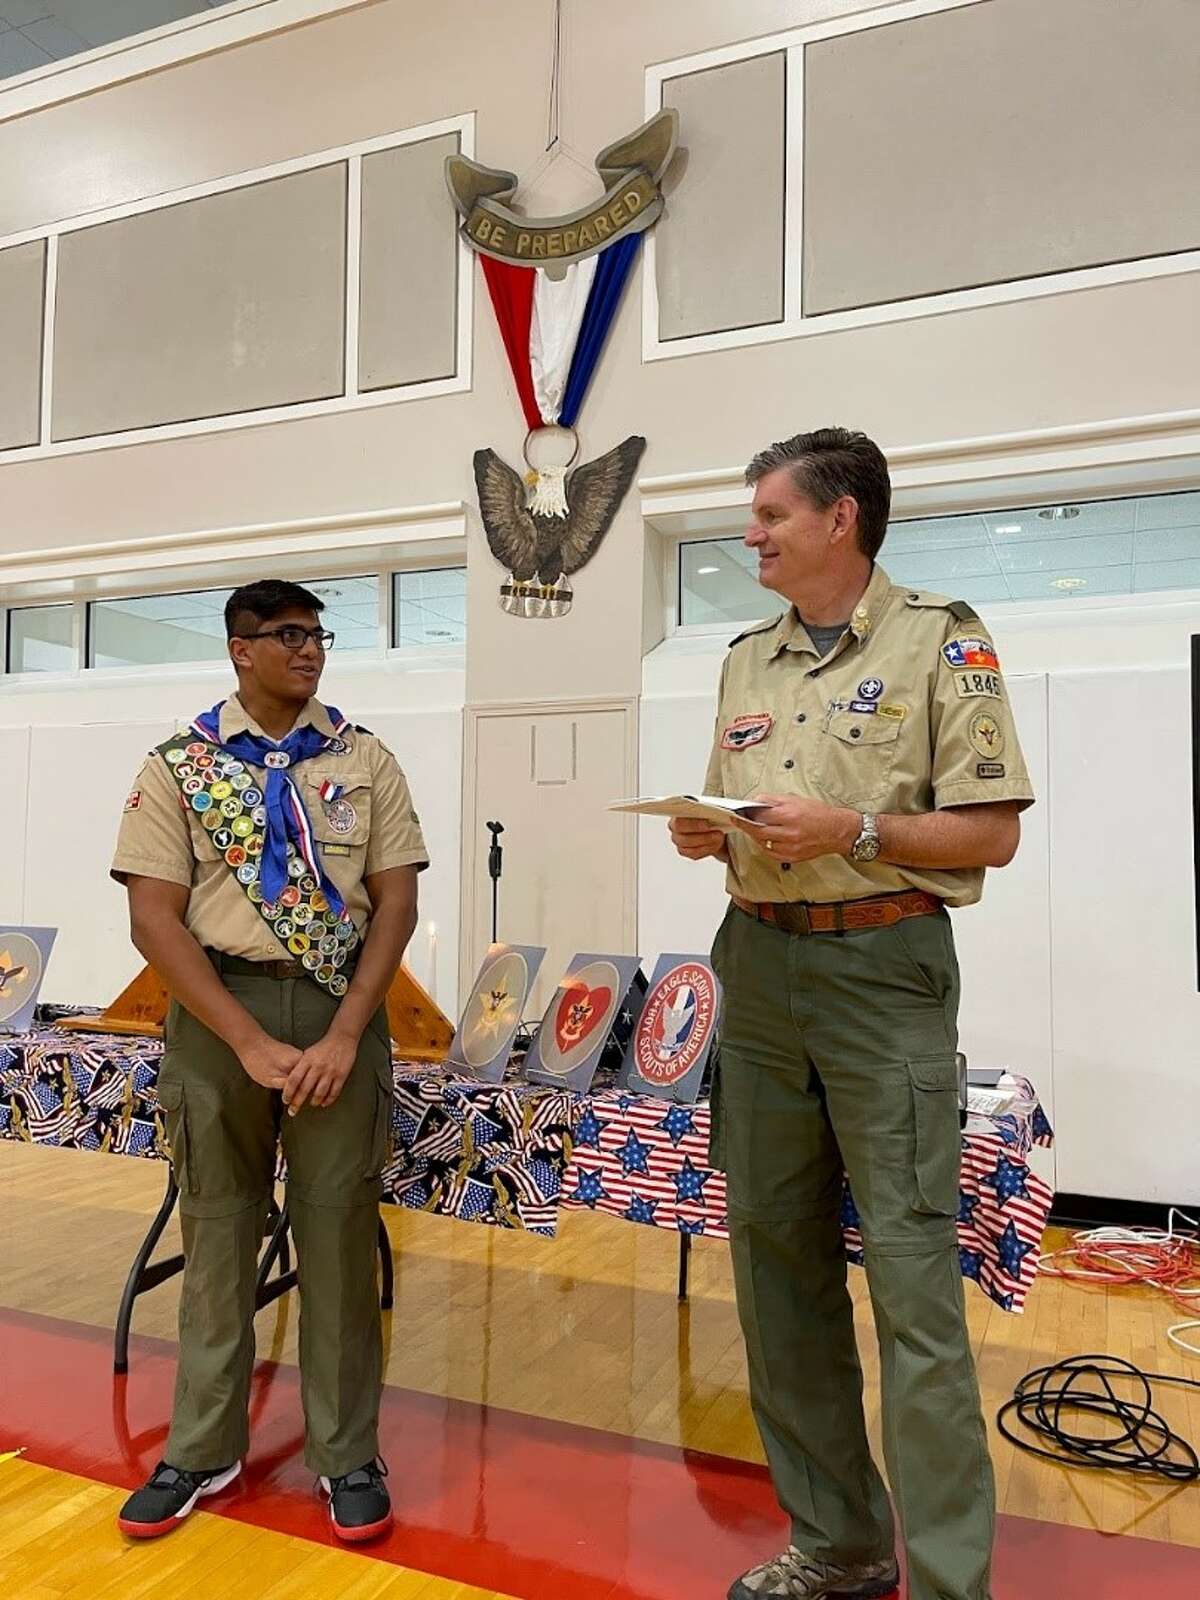 Kavin Gidvani of  BSA Troop 1845 in Sugar Land was awarded the rank of Eagle Scout at a ceremony last month.